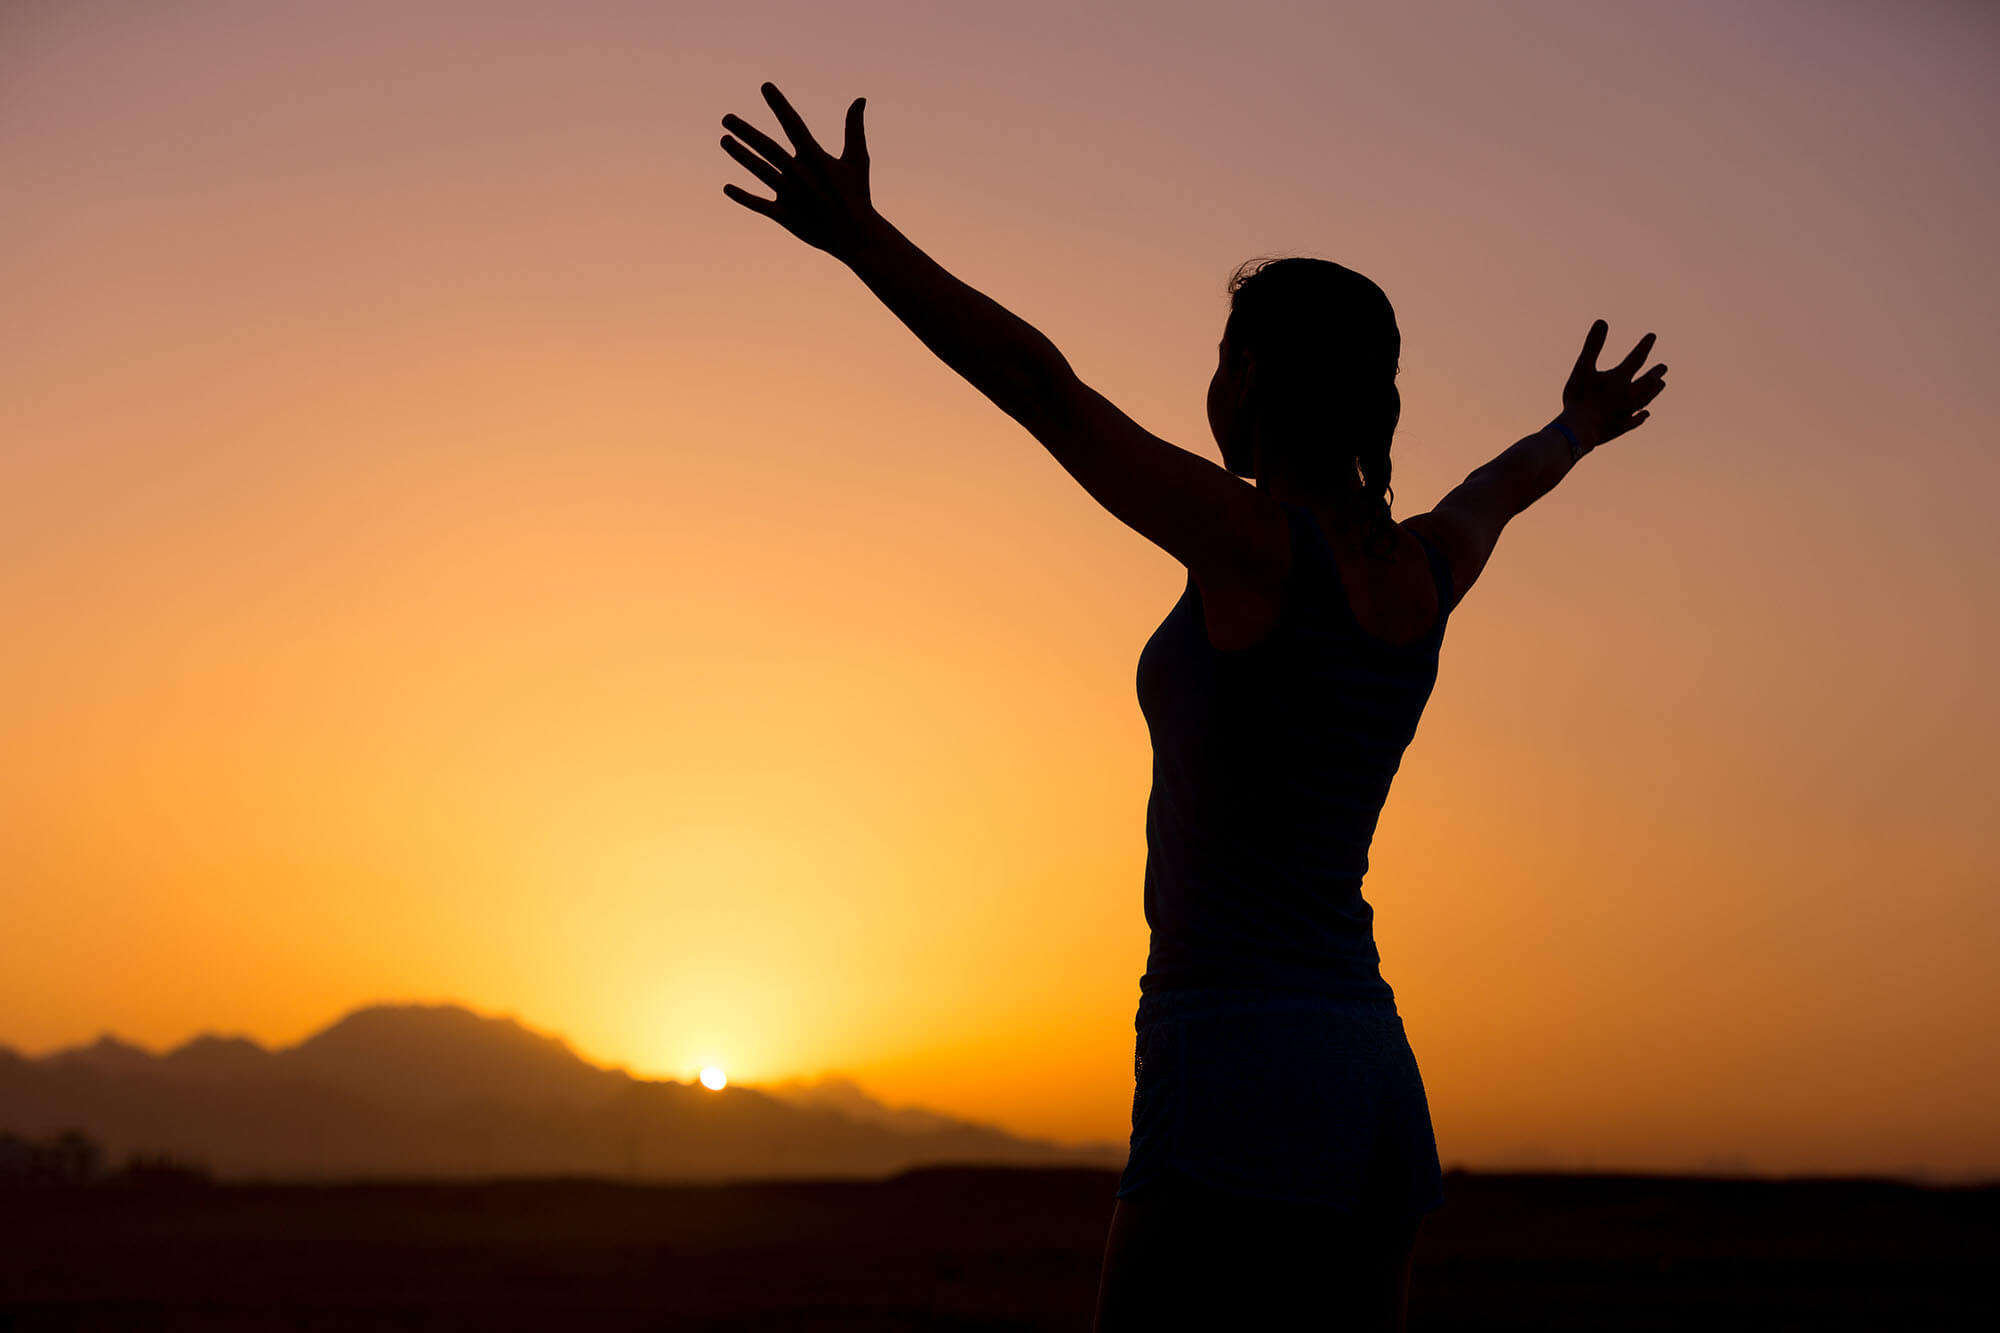 A woman in silhouette with outstretched arms looking at the sunset.